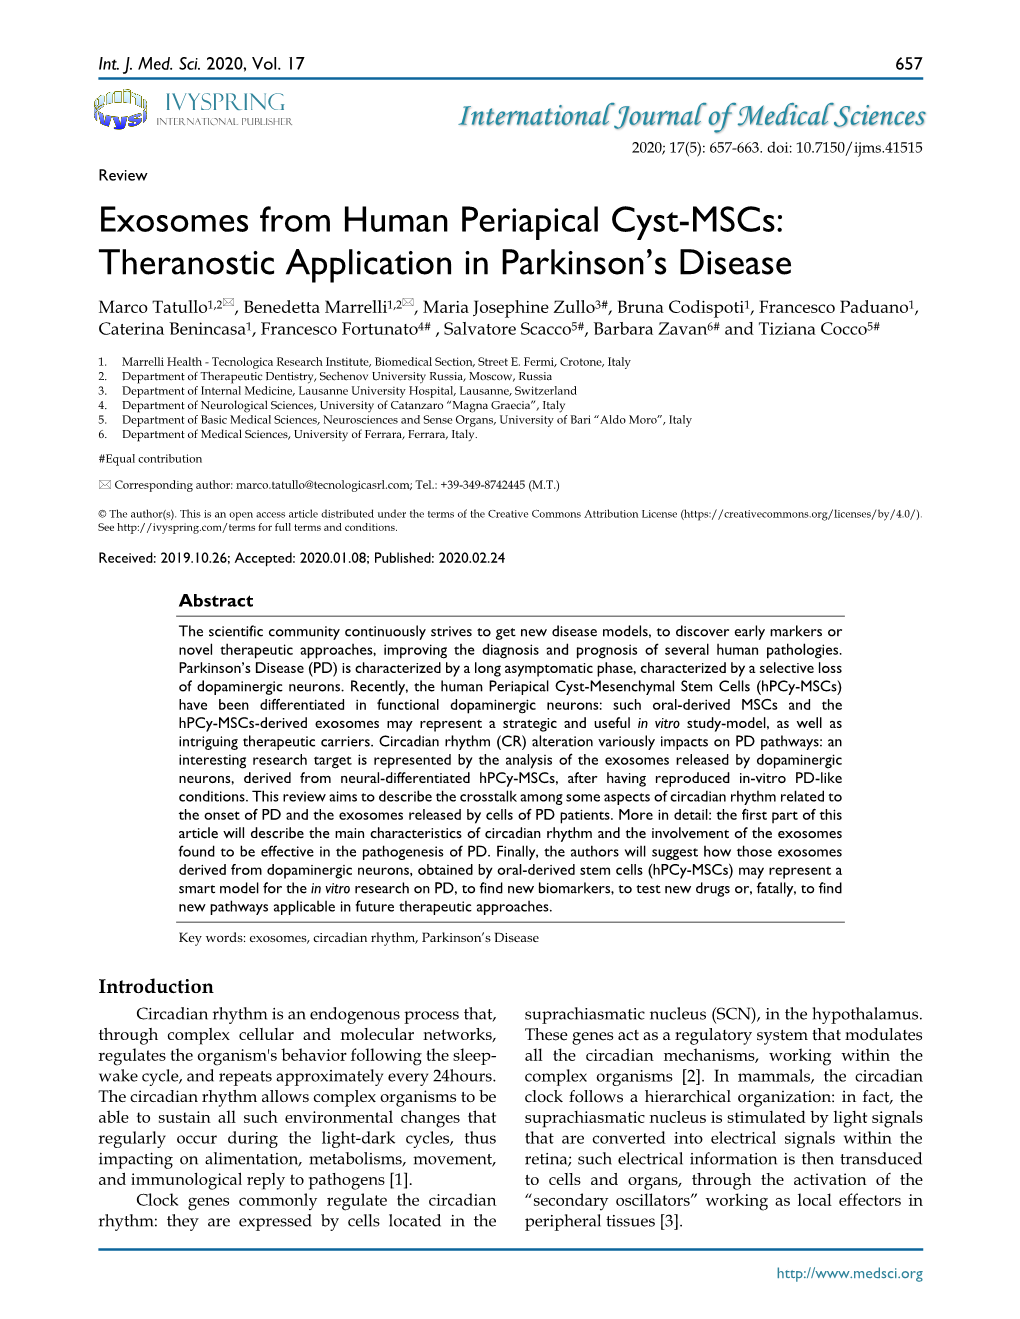 Exosomes from Human Periapical Cyst-Mscs